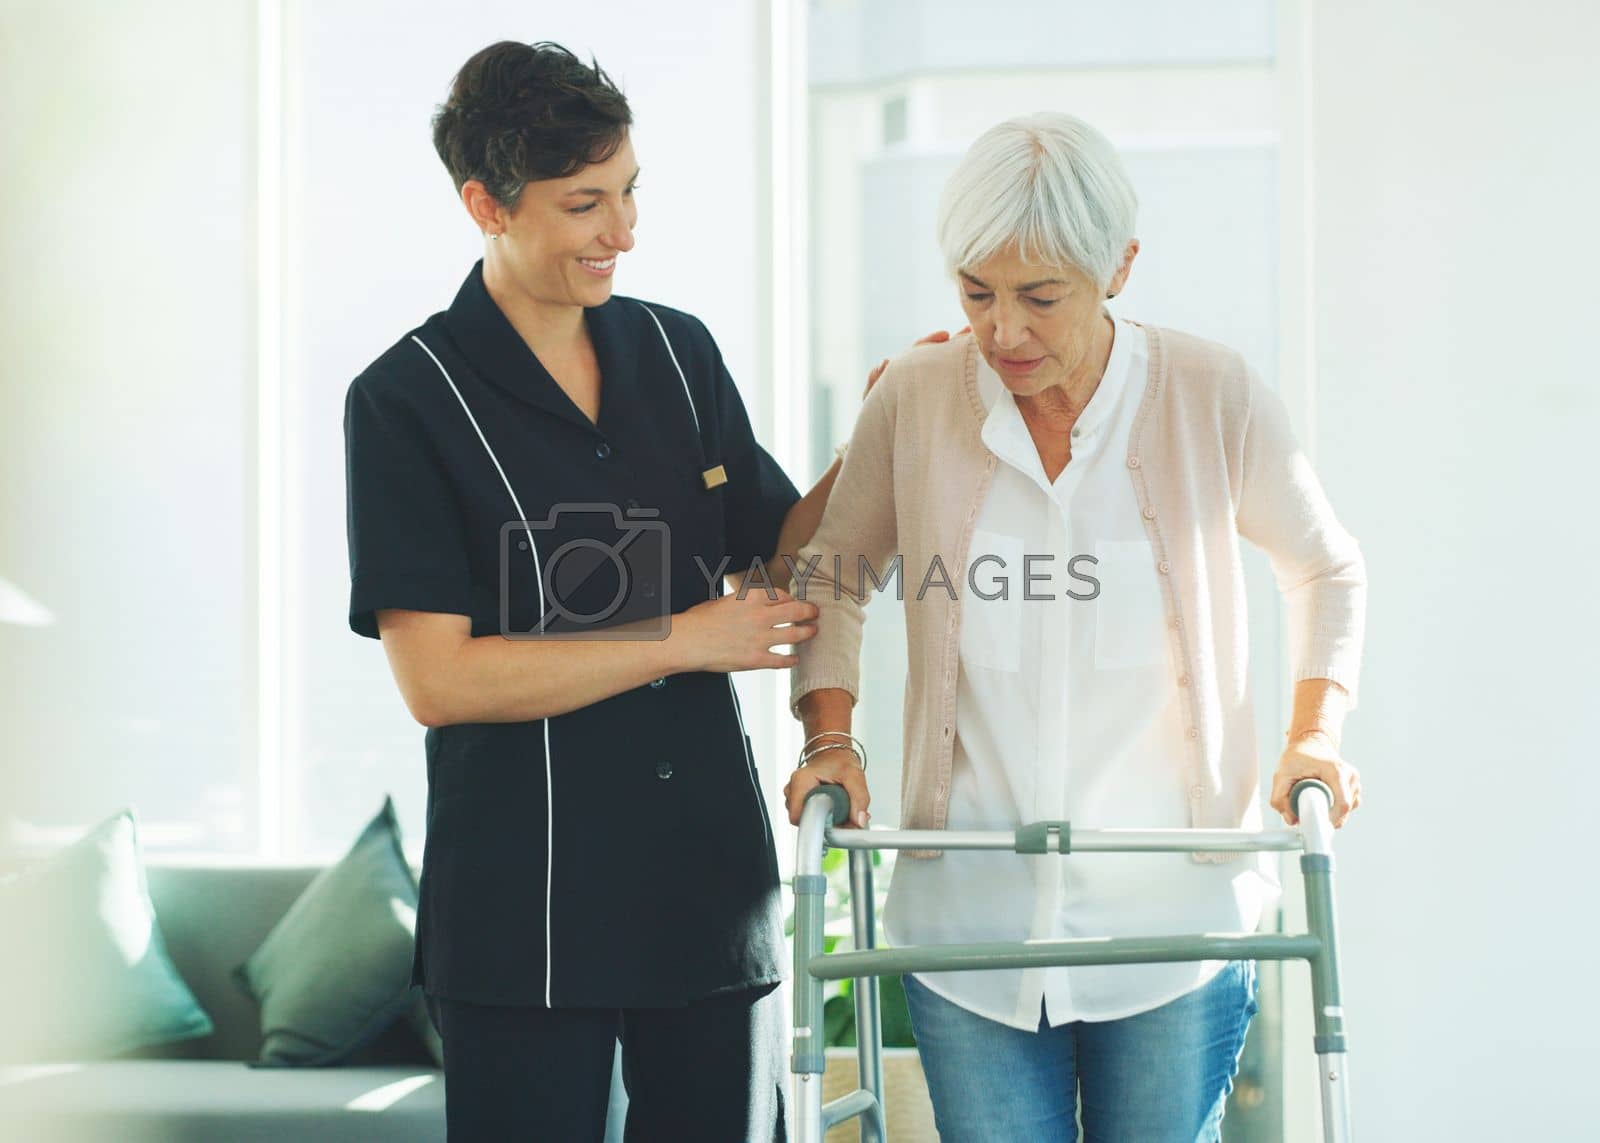 Royalty free image of Please help me. an attractive young healthcare professional helping her senior patient walk with a walker in a nursing home. by YuriArcurs